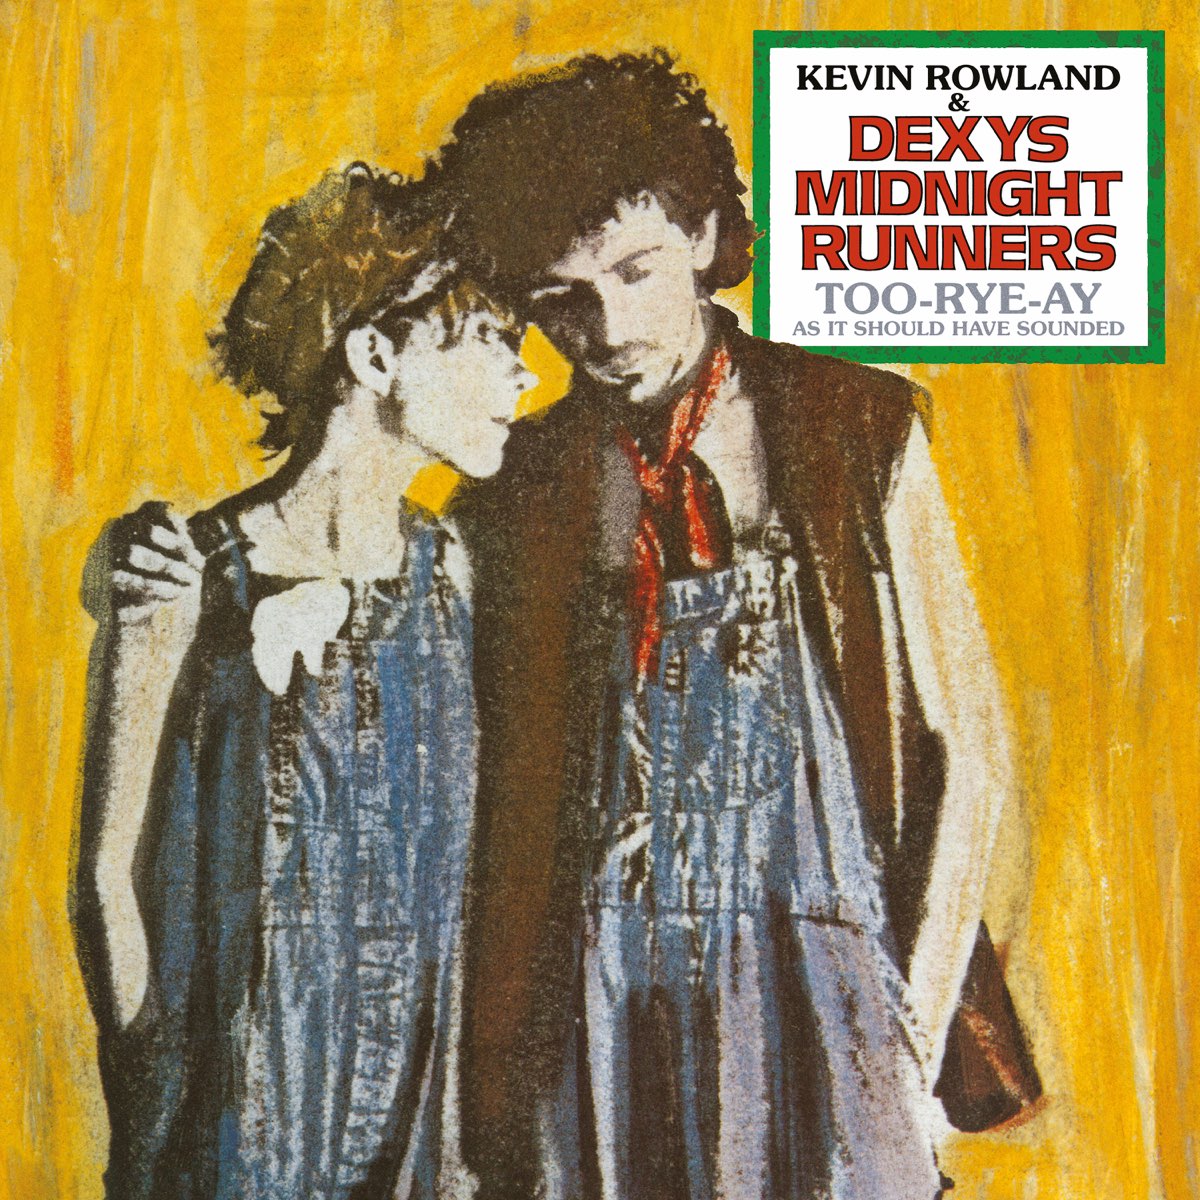 Rowland, Kevin & Dexys Midnight Runners: Too-Rye-Ay - As It Should Have Sounded (Vinyl LP)